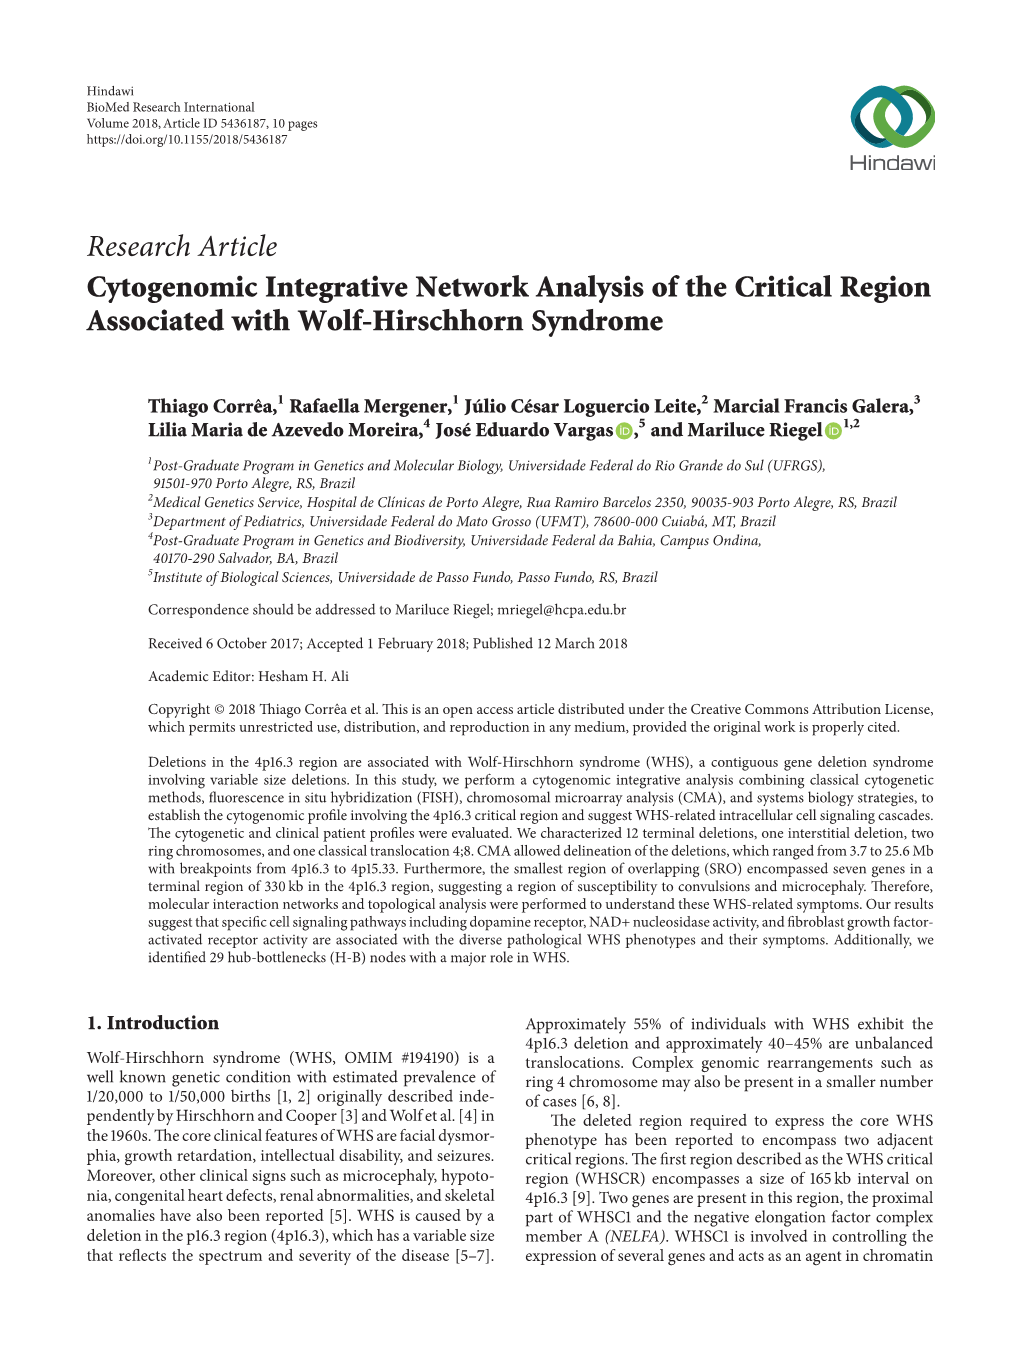 Research Article Cytogenomic Integrative Network Analysis of the Critical Region Associated with Wolf-Hirschhorn Syndrome